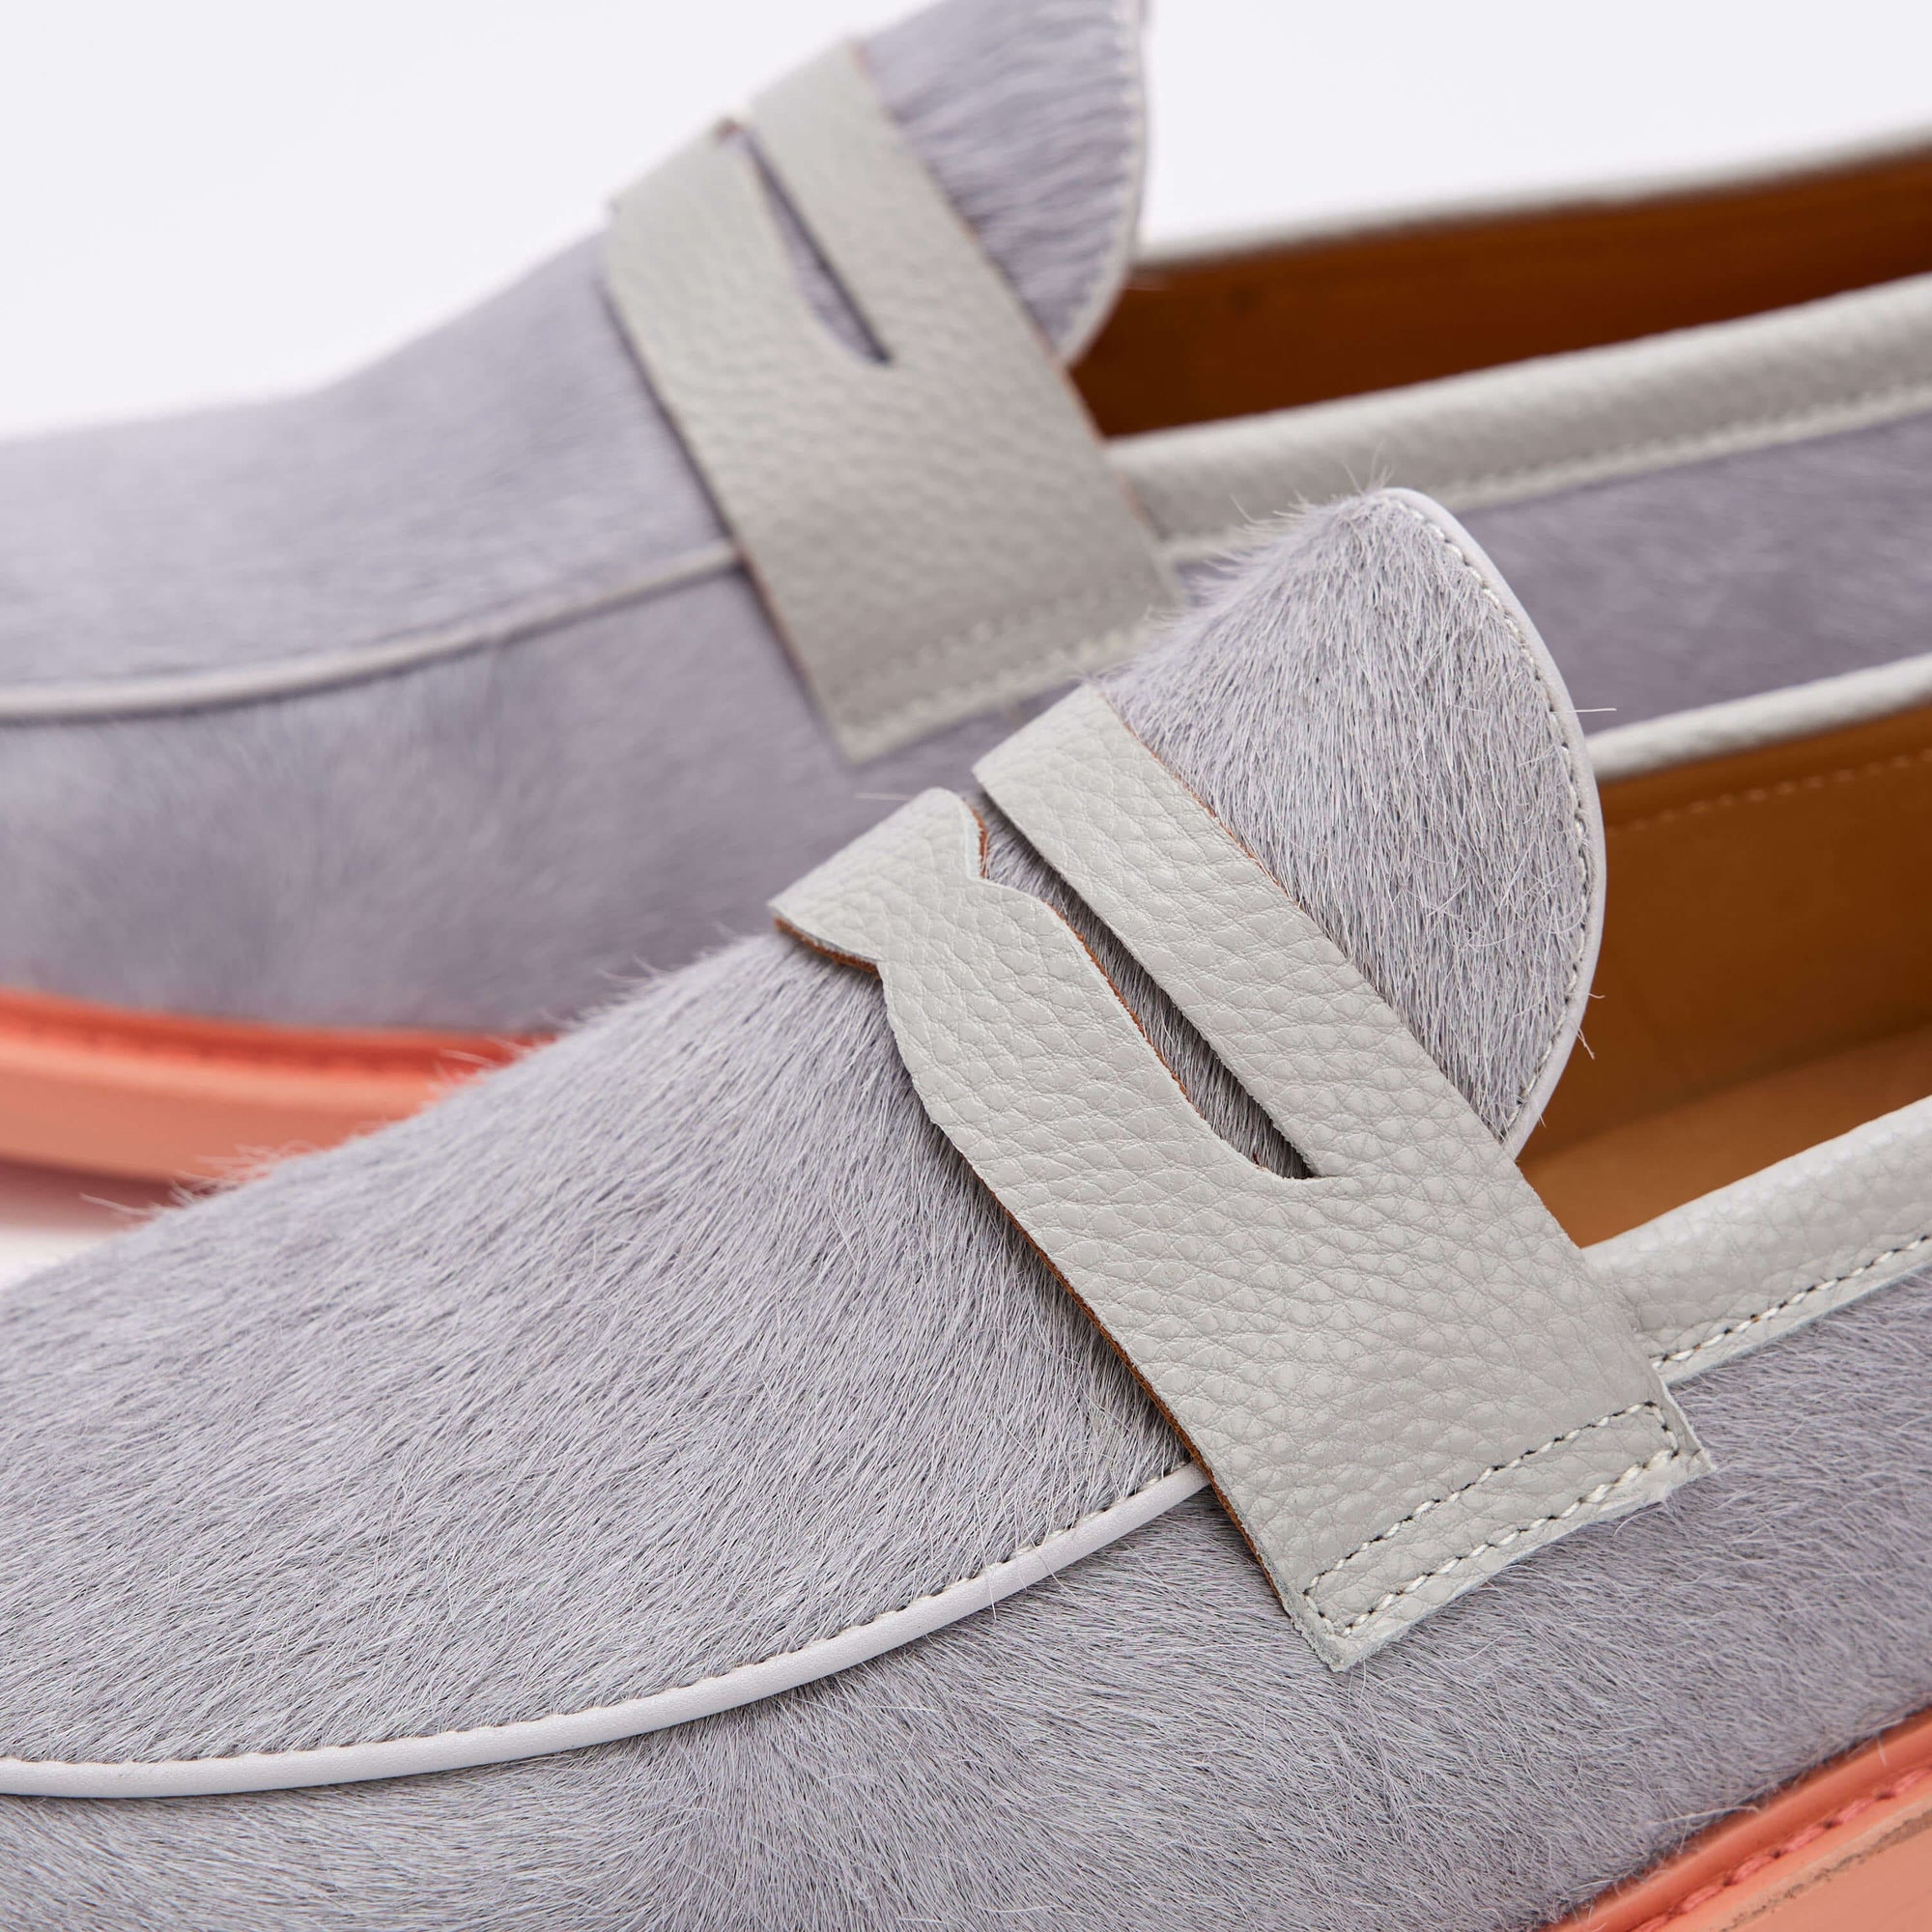 Calum Grey/Peach Leather Penny Loafers